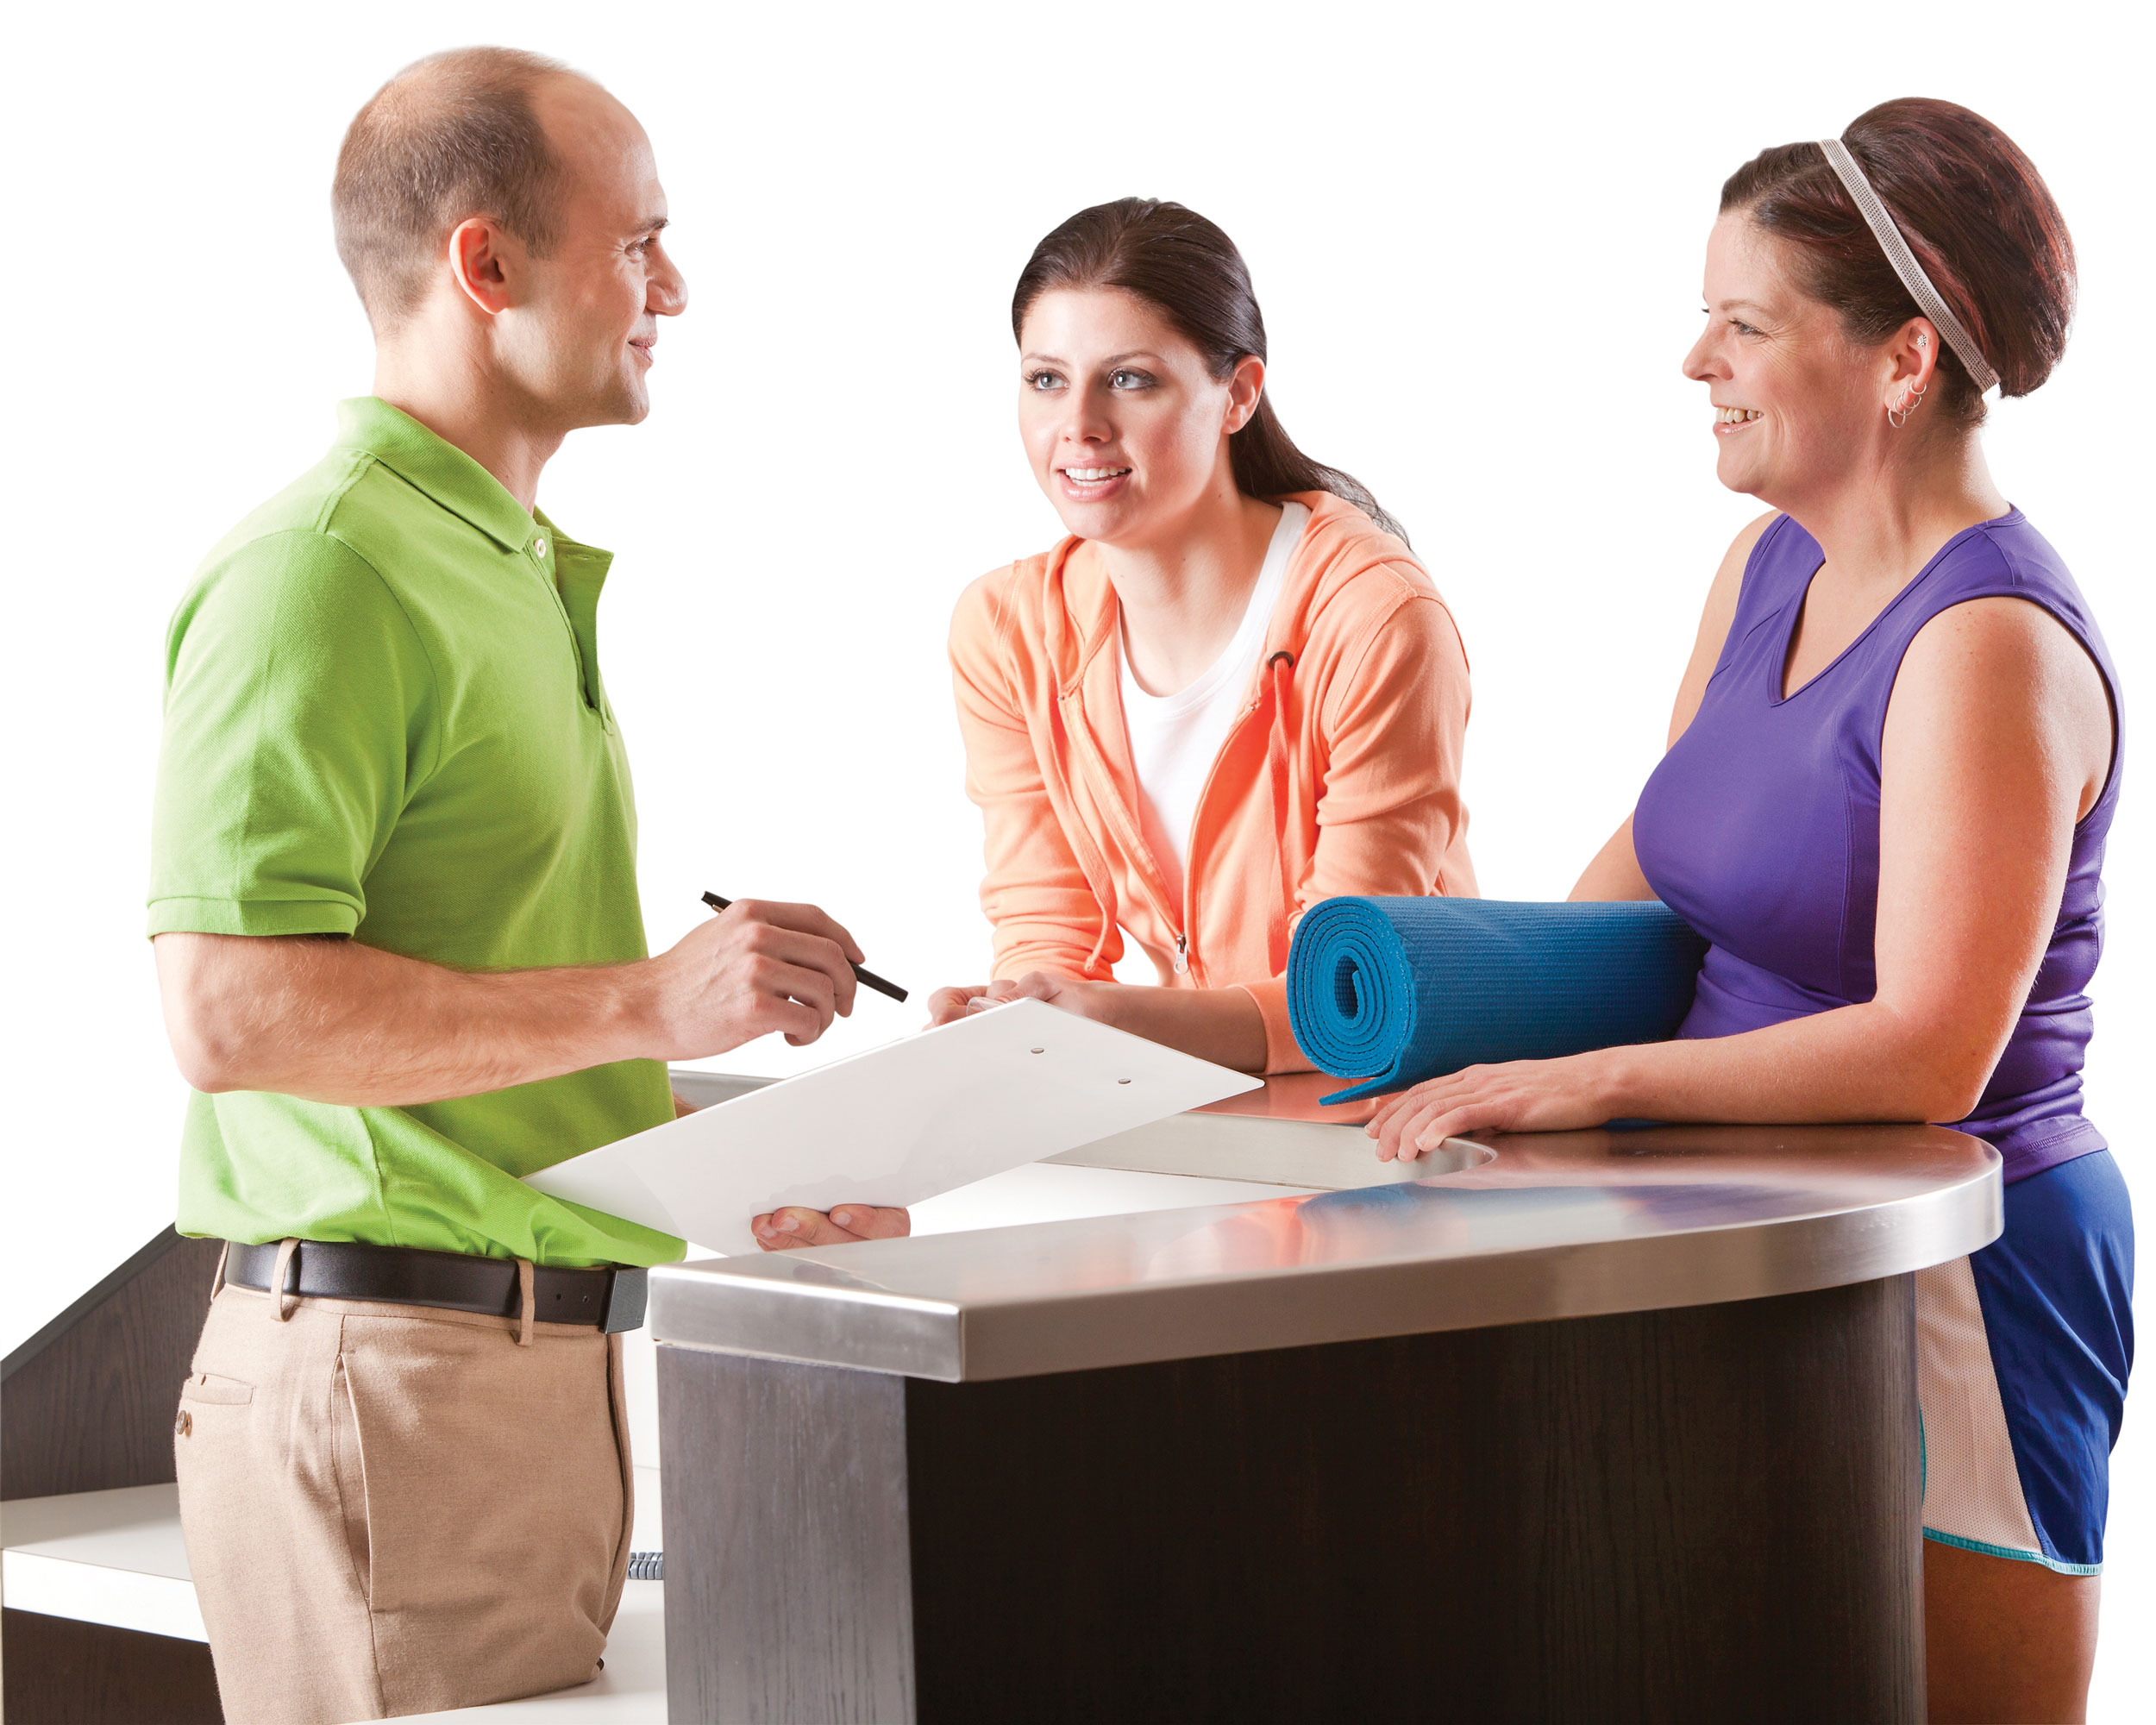 Two women checking in for a fitness class at the members desk with a man.